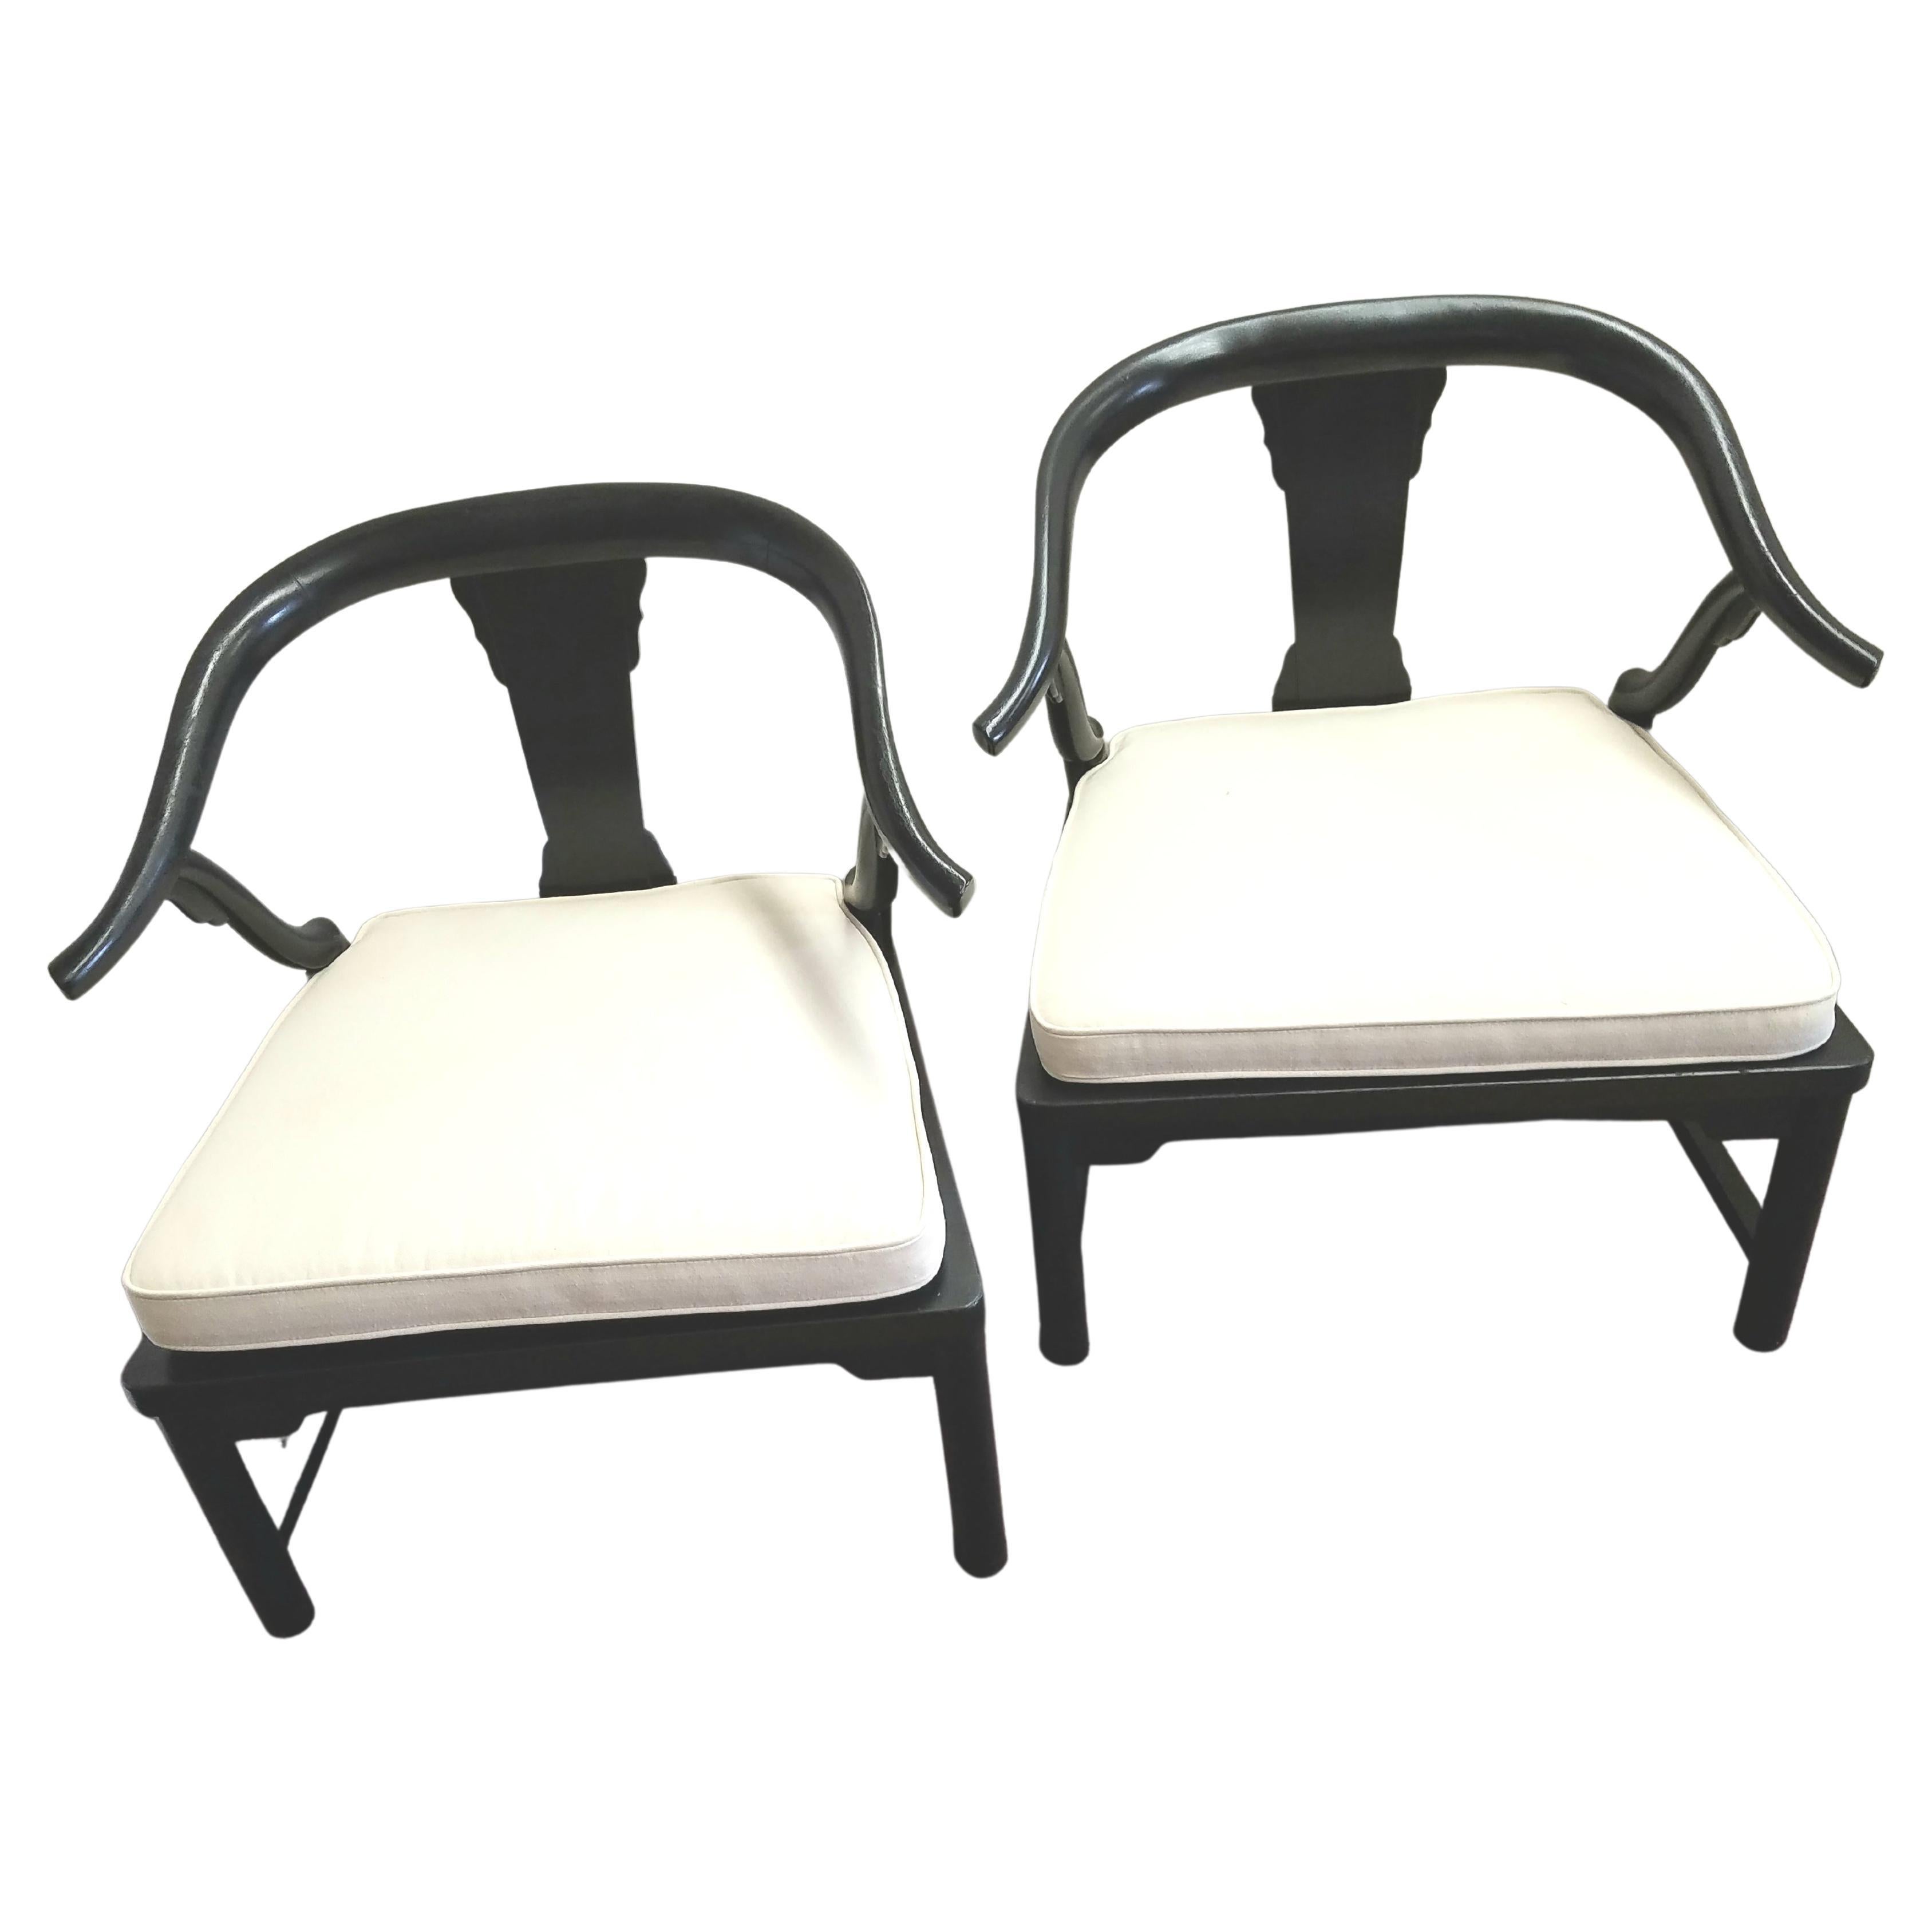 Pair of Horseshoe Back Chinese Style Low Chairs in the Manner of James Mont 